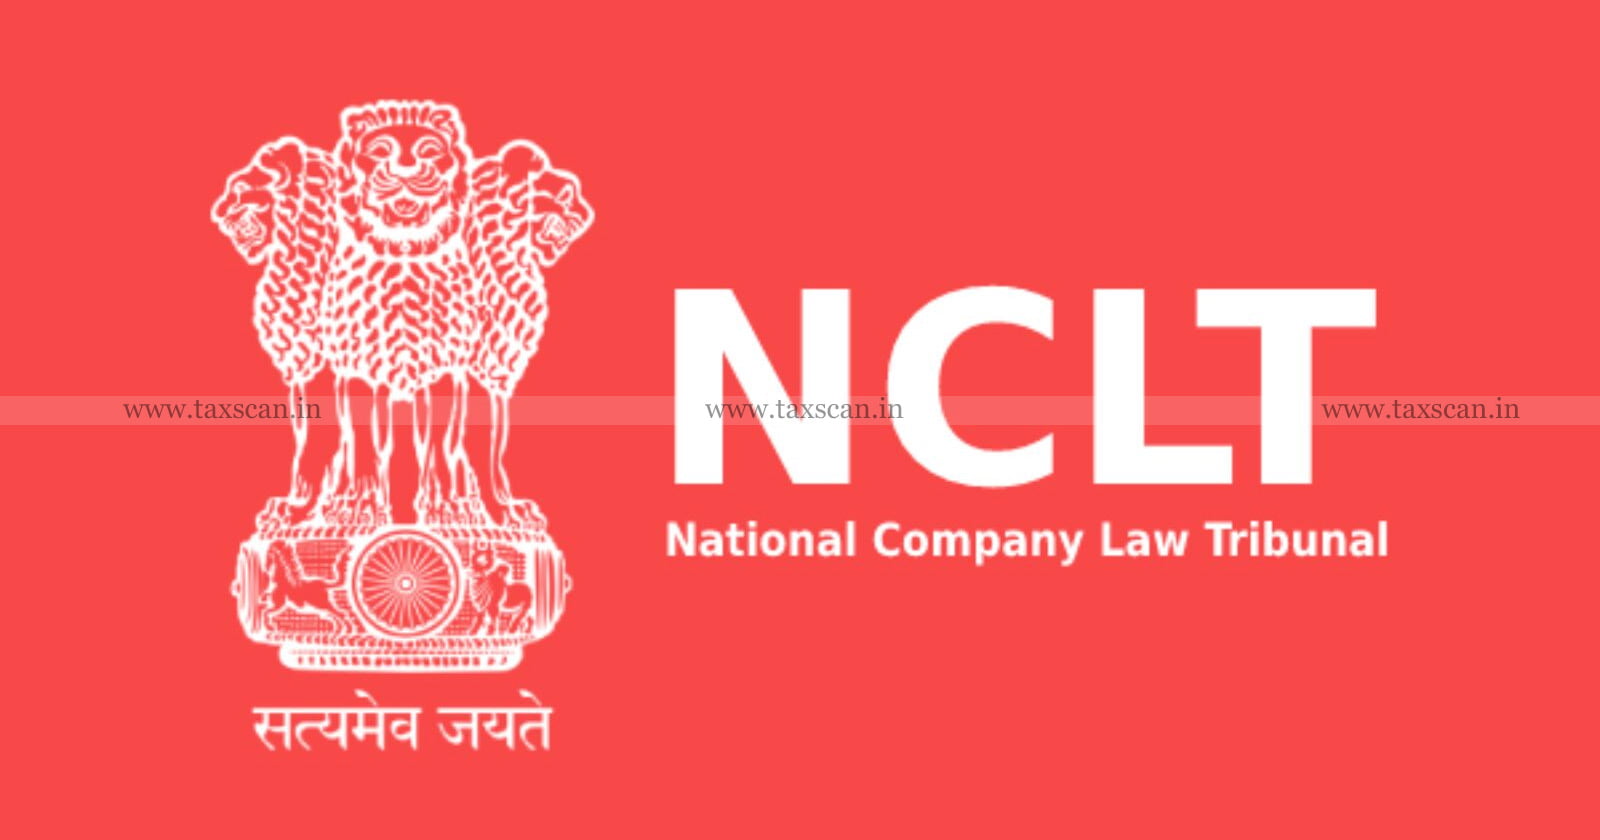 ‘Operational - Creditors’ - can - claim - only - Money - that - is - payable - IBC - NCLT - TAXSCAN